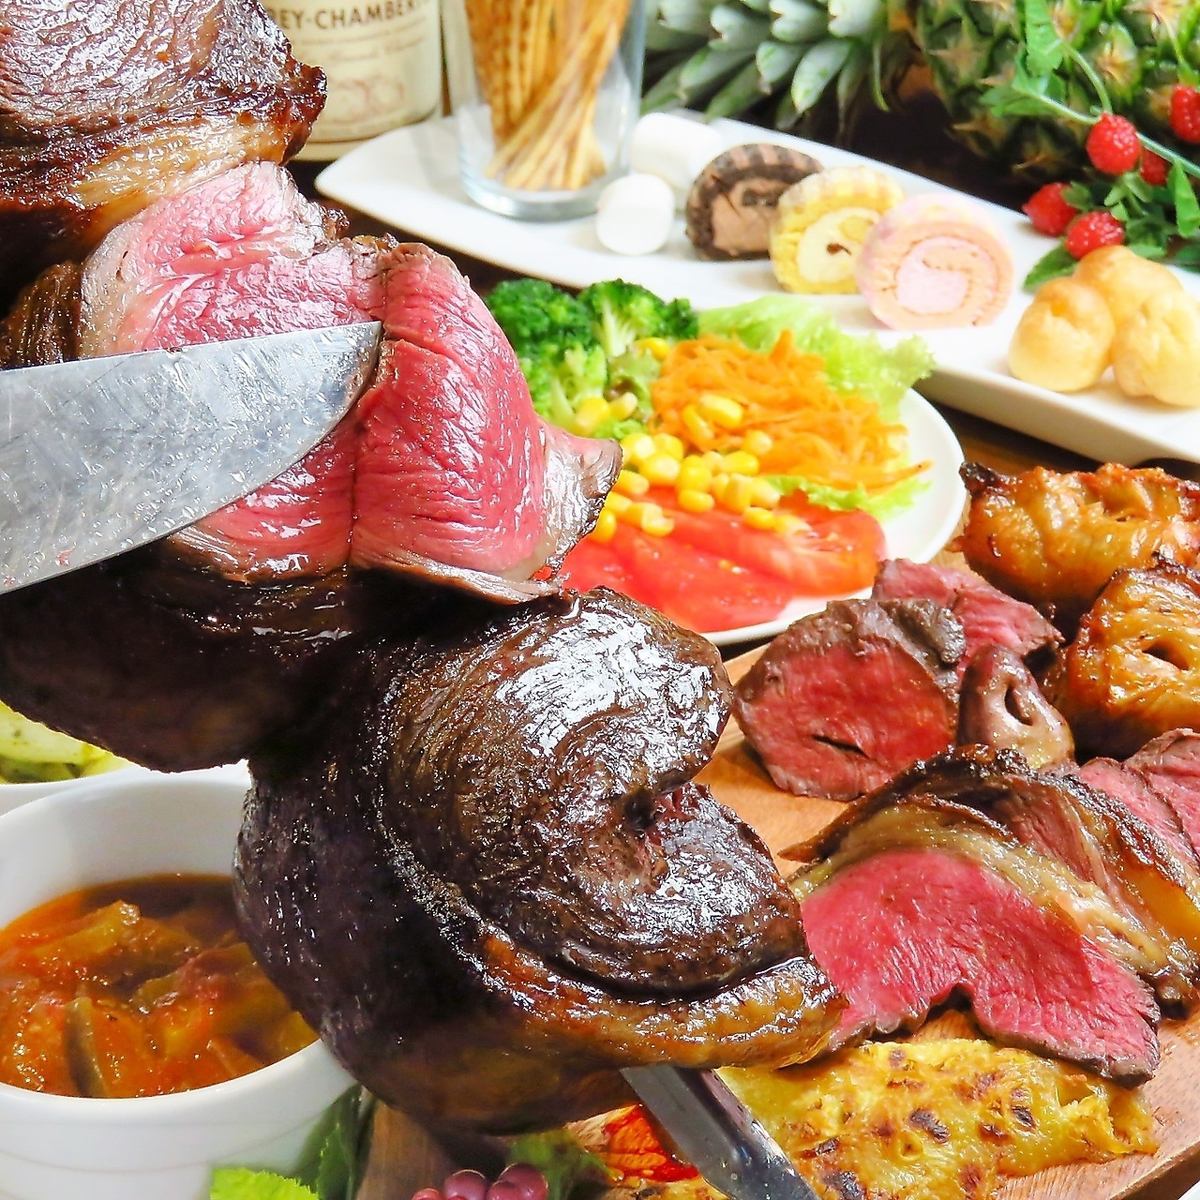 Open all day on Saturdays, Sundays, and holidays! Enjoy lunch with delicious churrasco♪